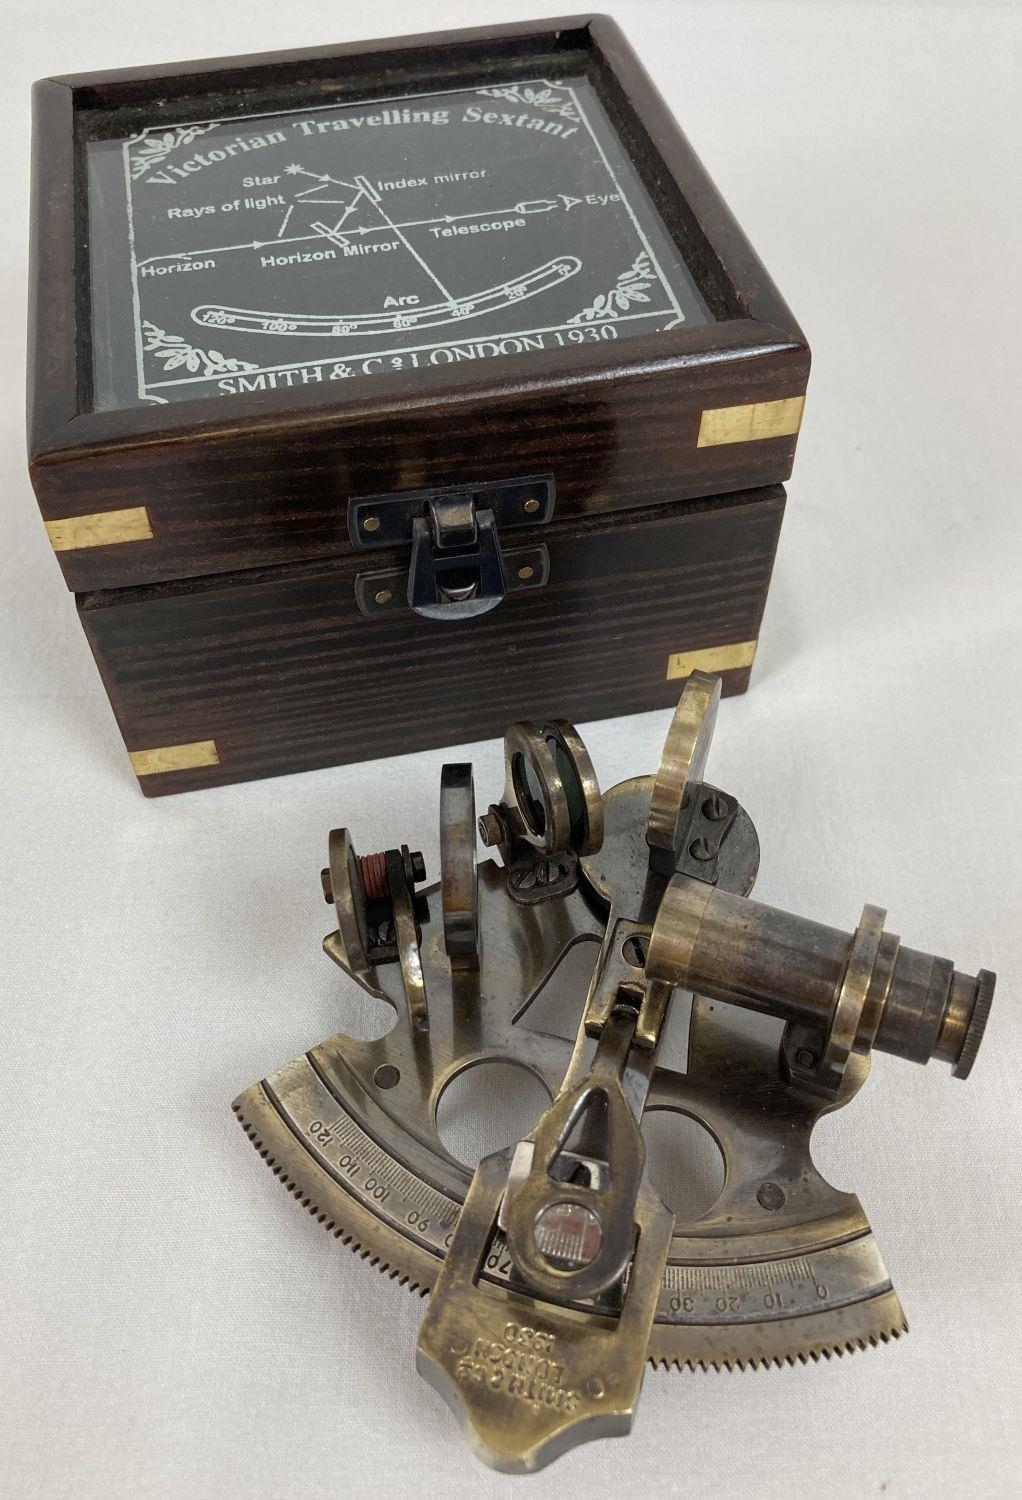 A replica wooden and glass lidded box containing a "Victorian Travelling Sextant" by Smith & Co.